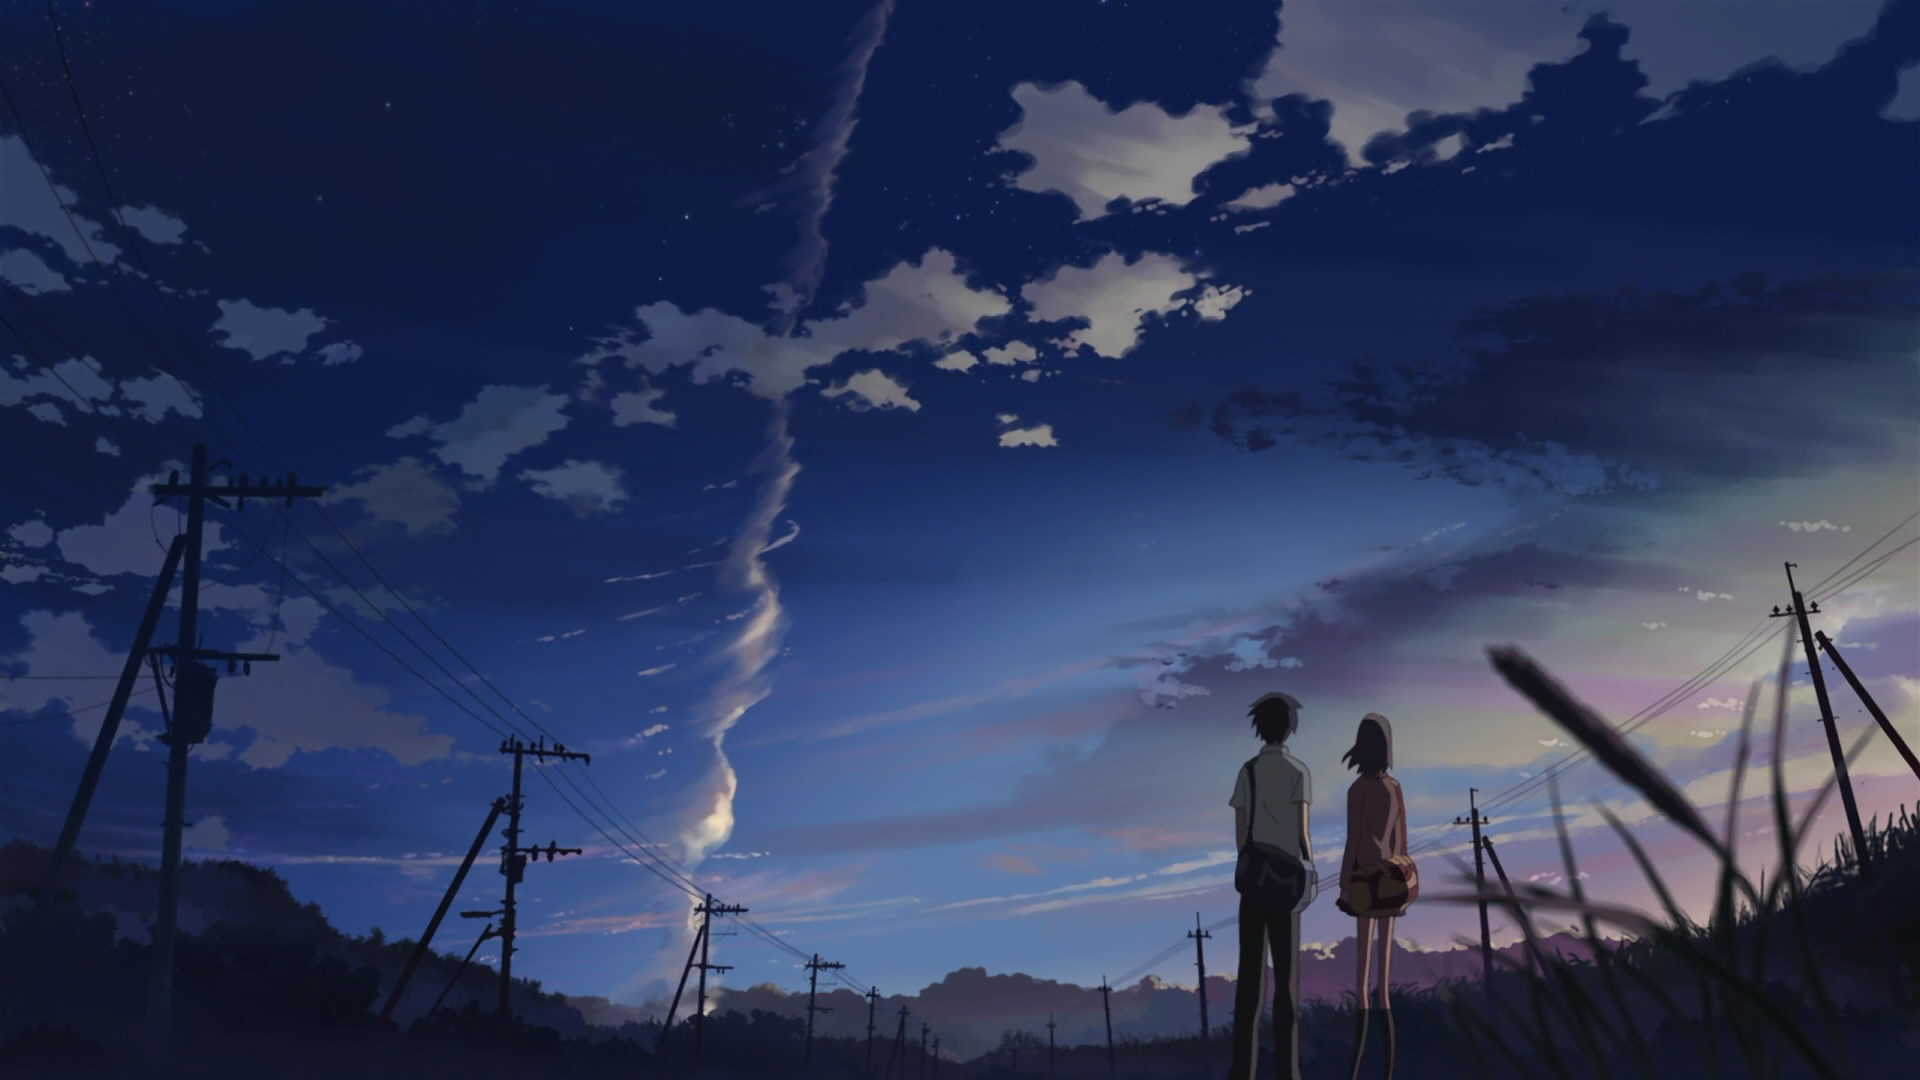 5 Centimeters Per Second Full HD Widescreen wallpapers